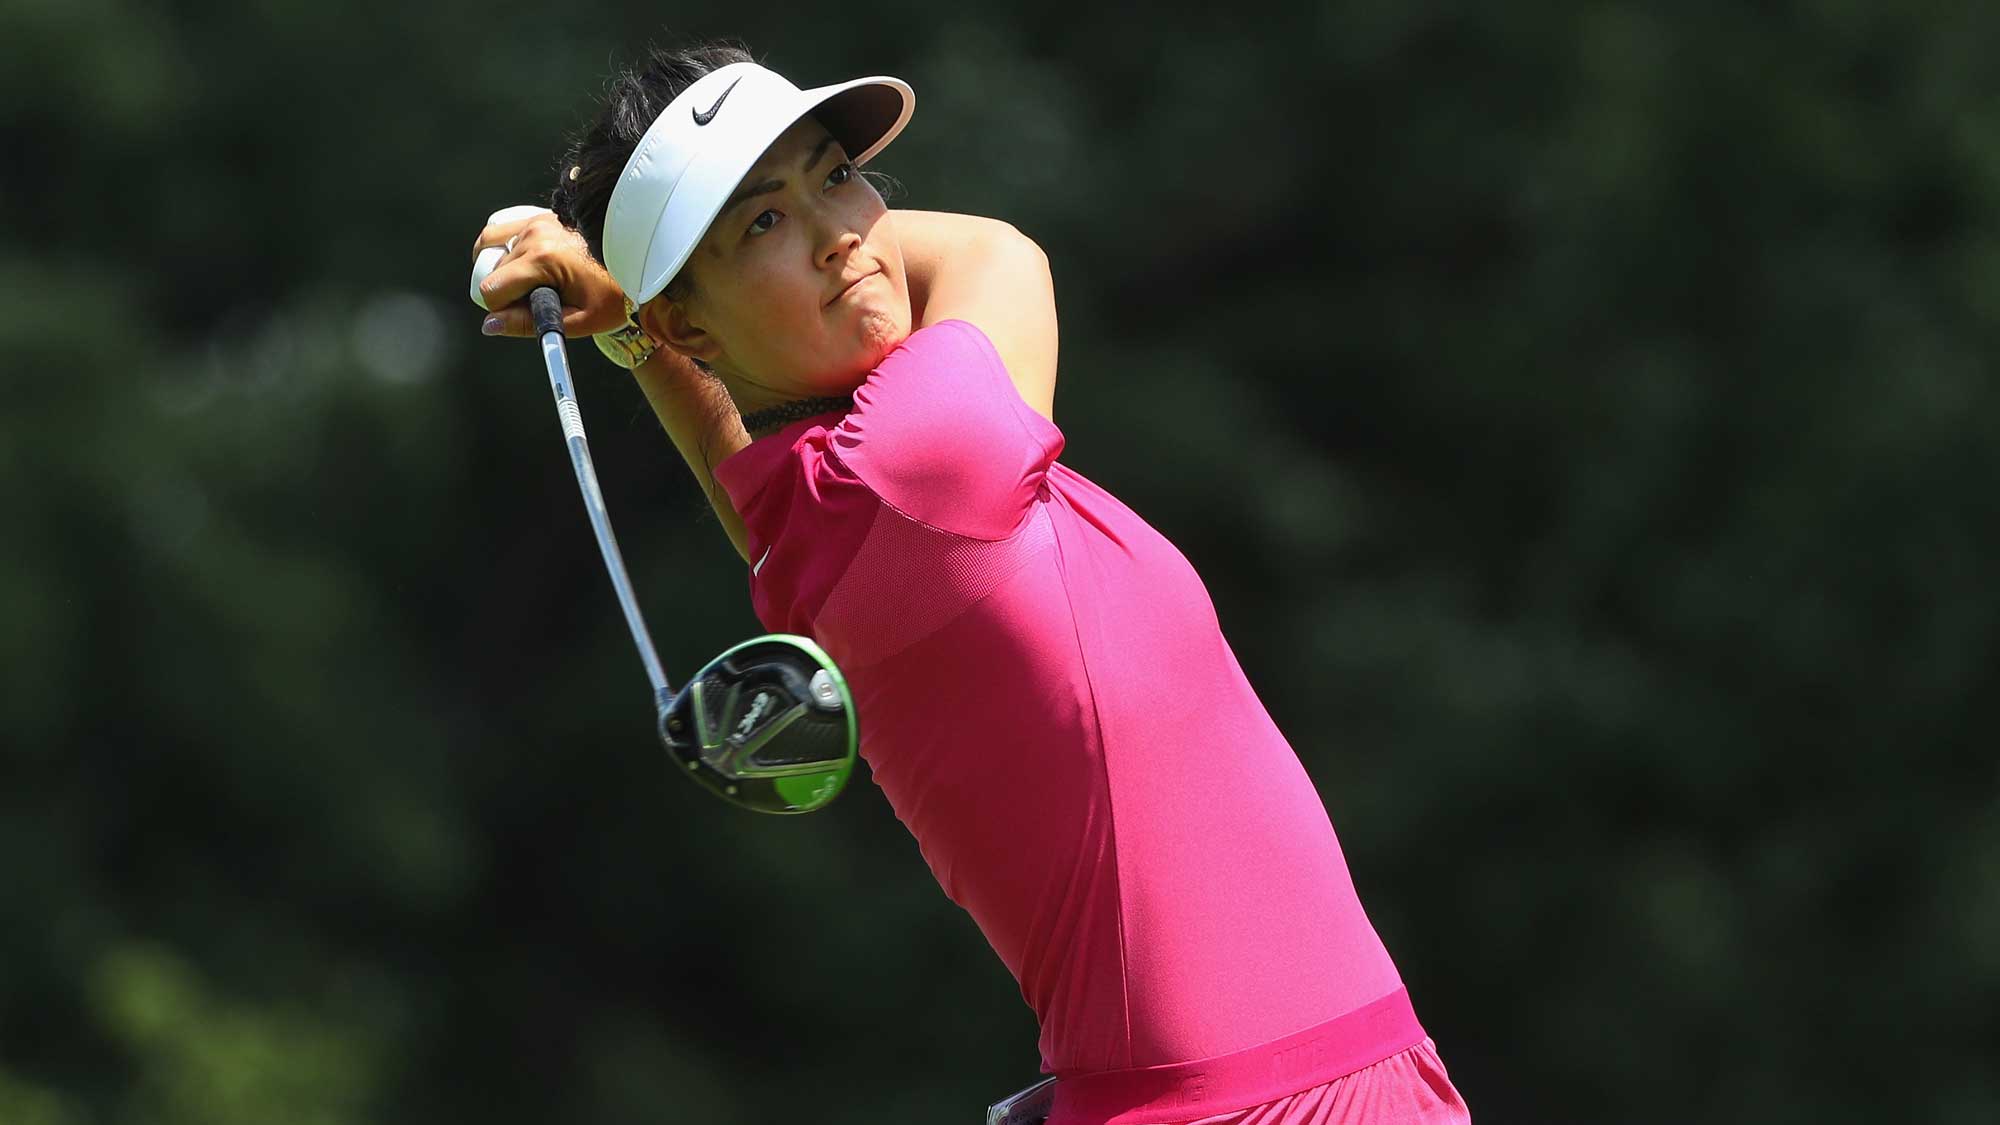 Michelle Wie hits her tee shot on the ninth hole during the third round of the 2017 KPMG Women's PGA Championship